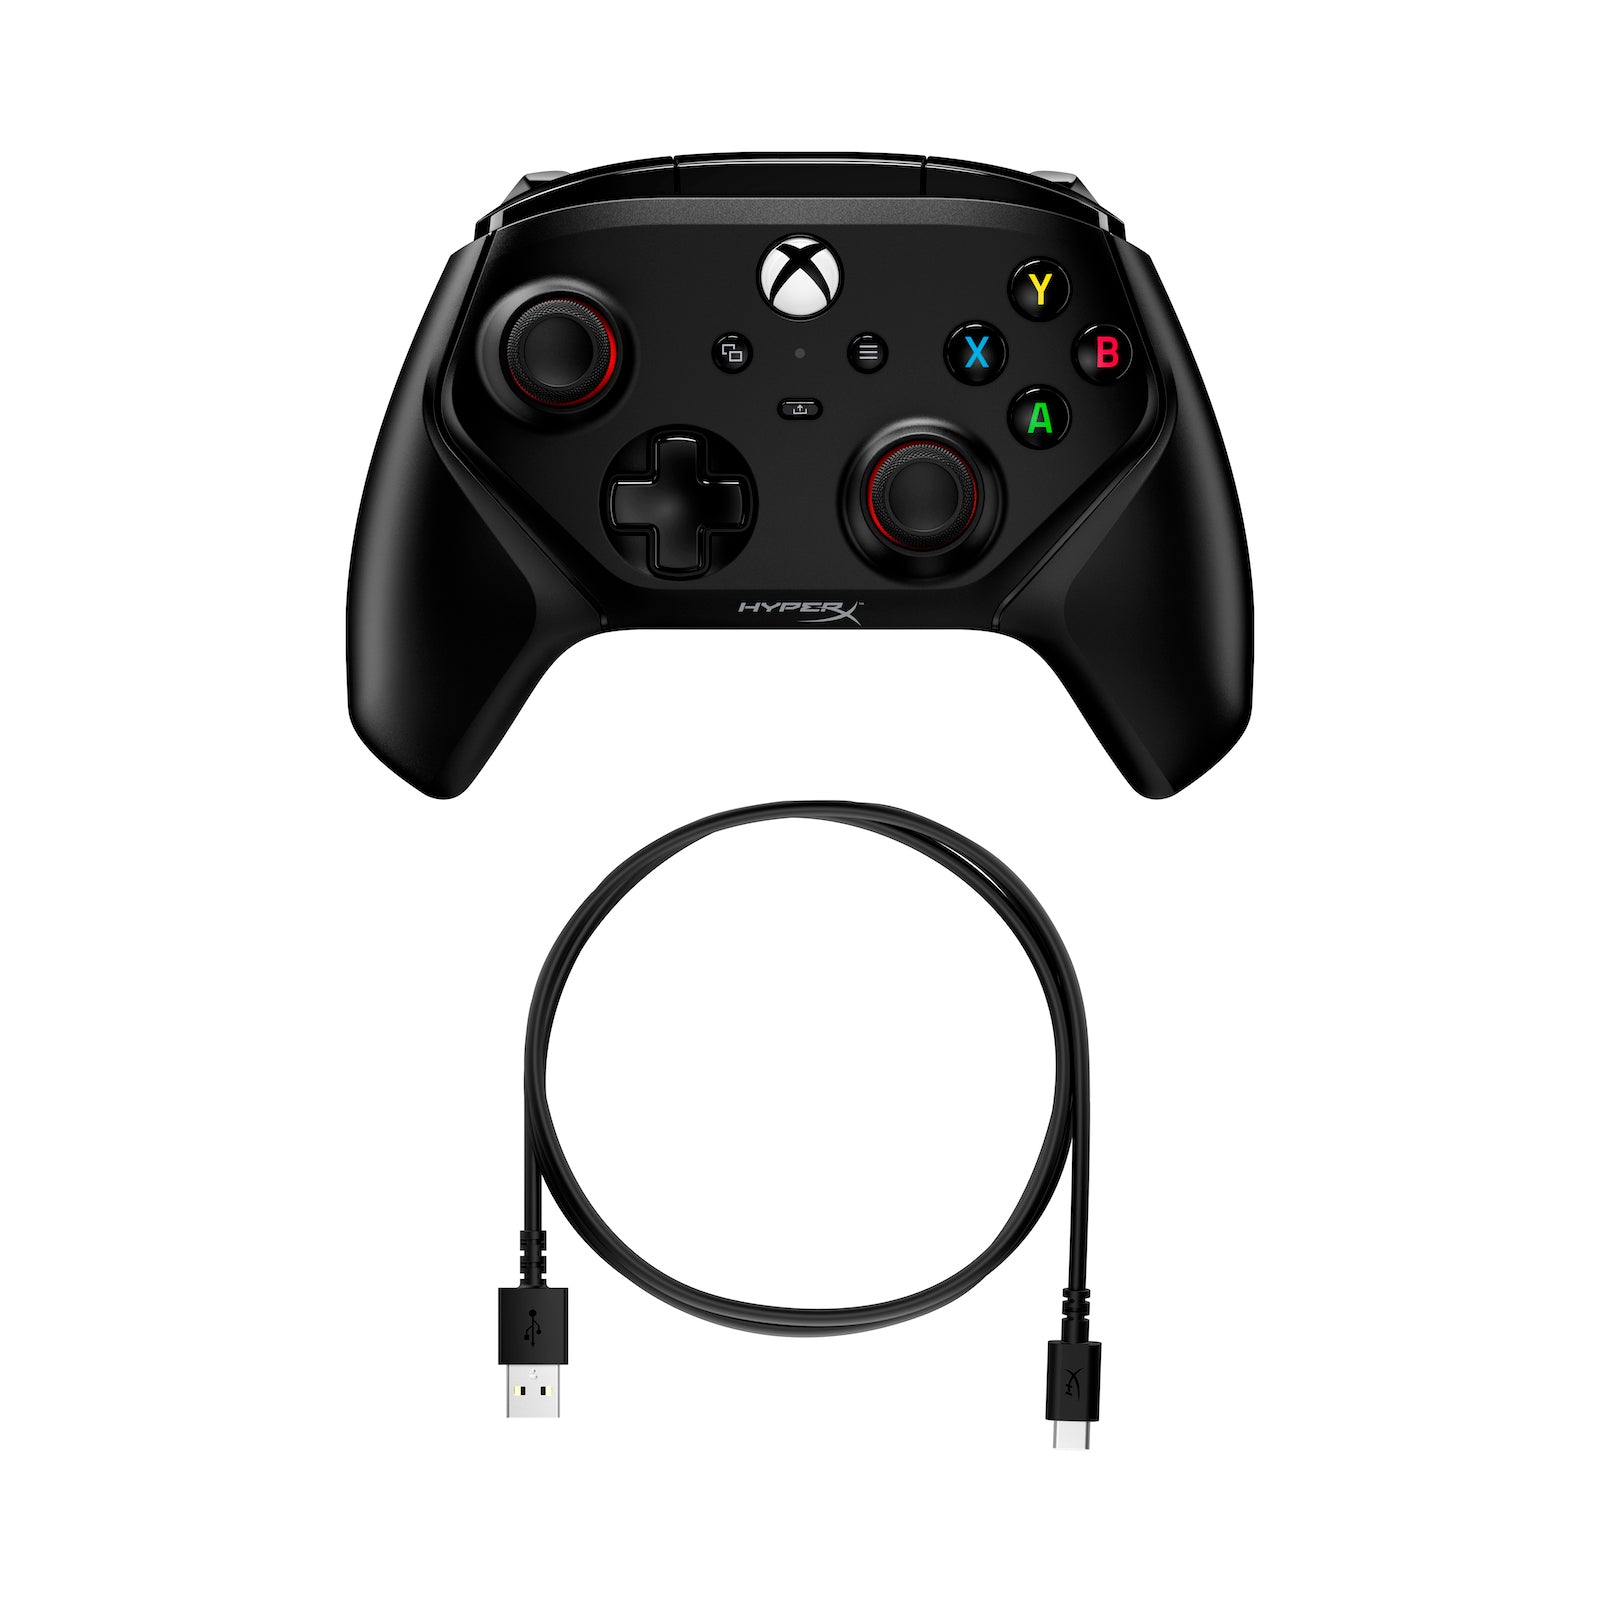 Accessories for HyperX Clutch gladiate gaming controller for Xbox including charging cable